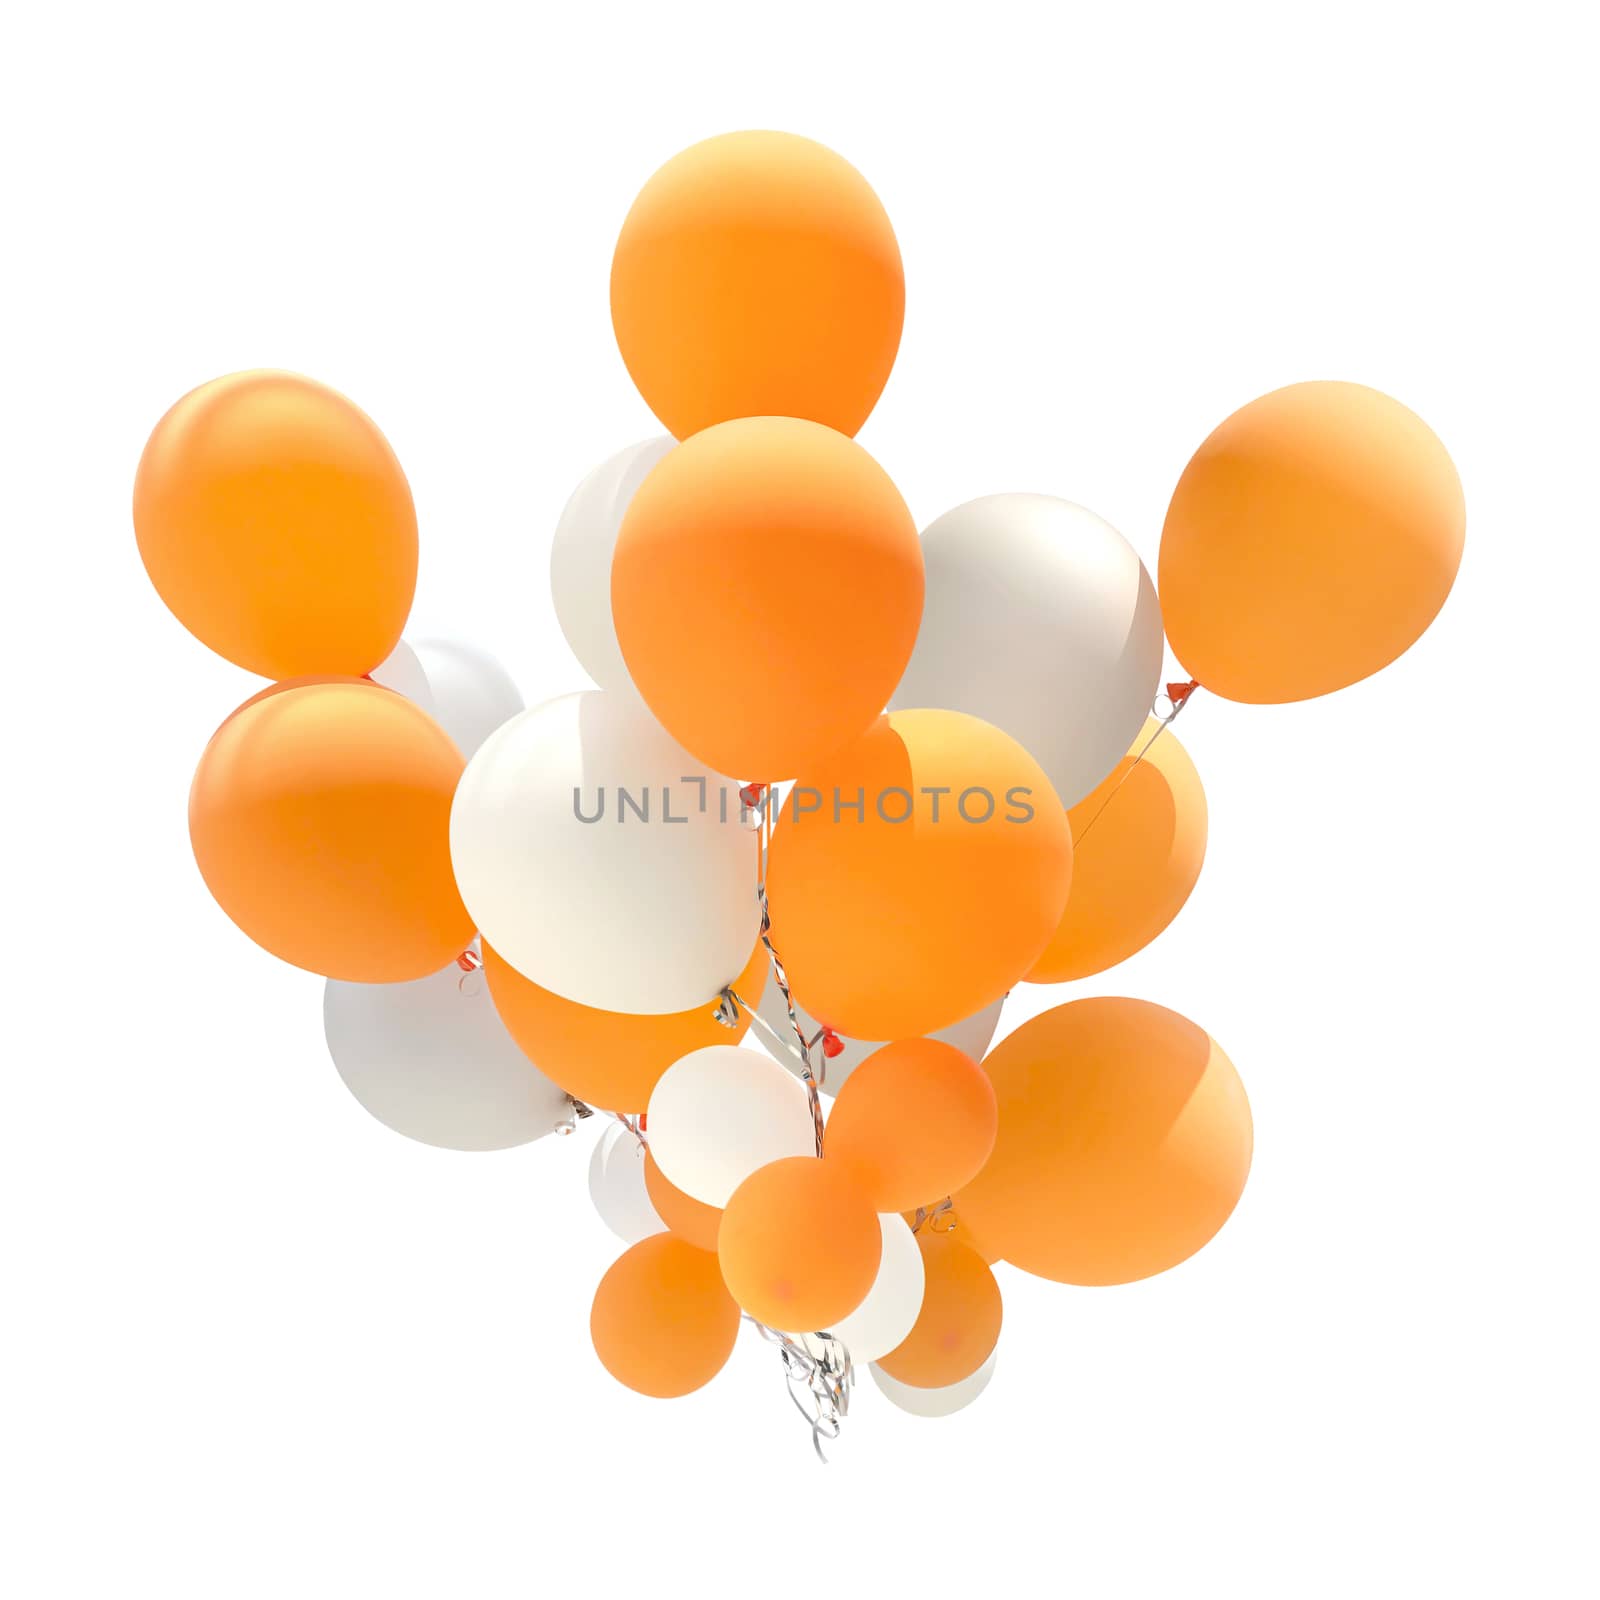 Group of orange and white color balloons by wattanaphob